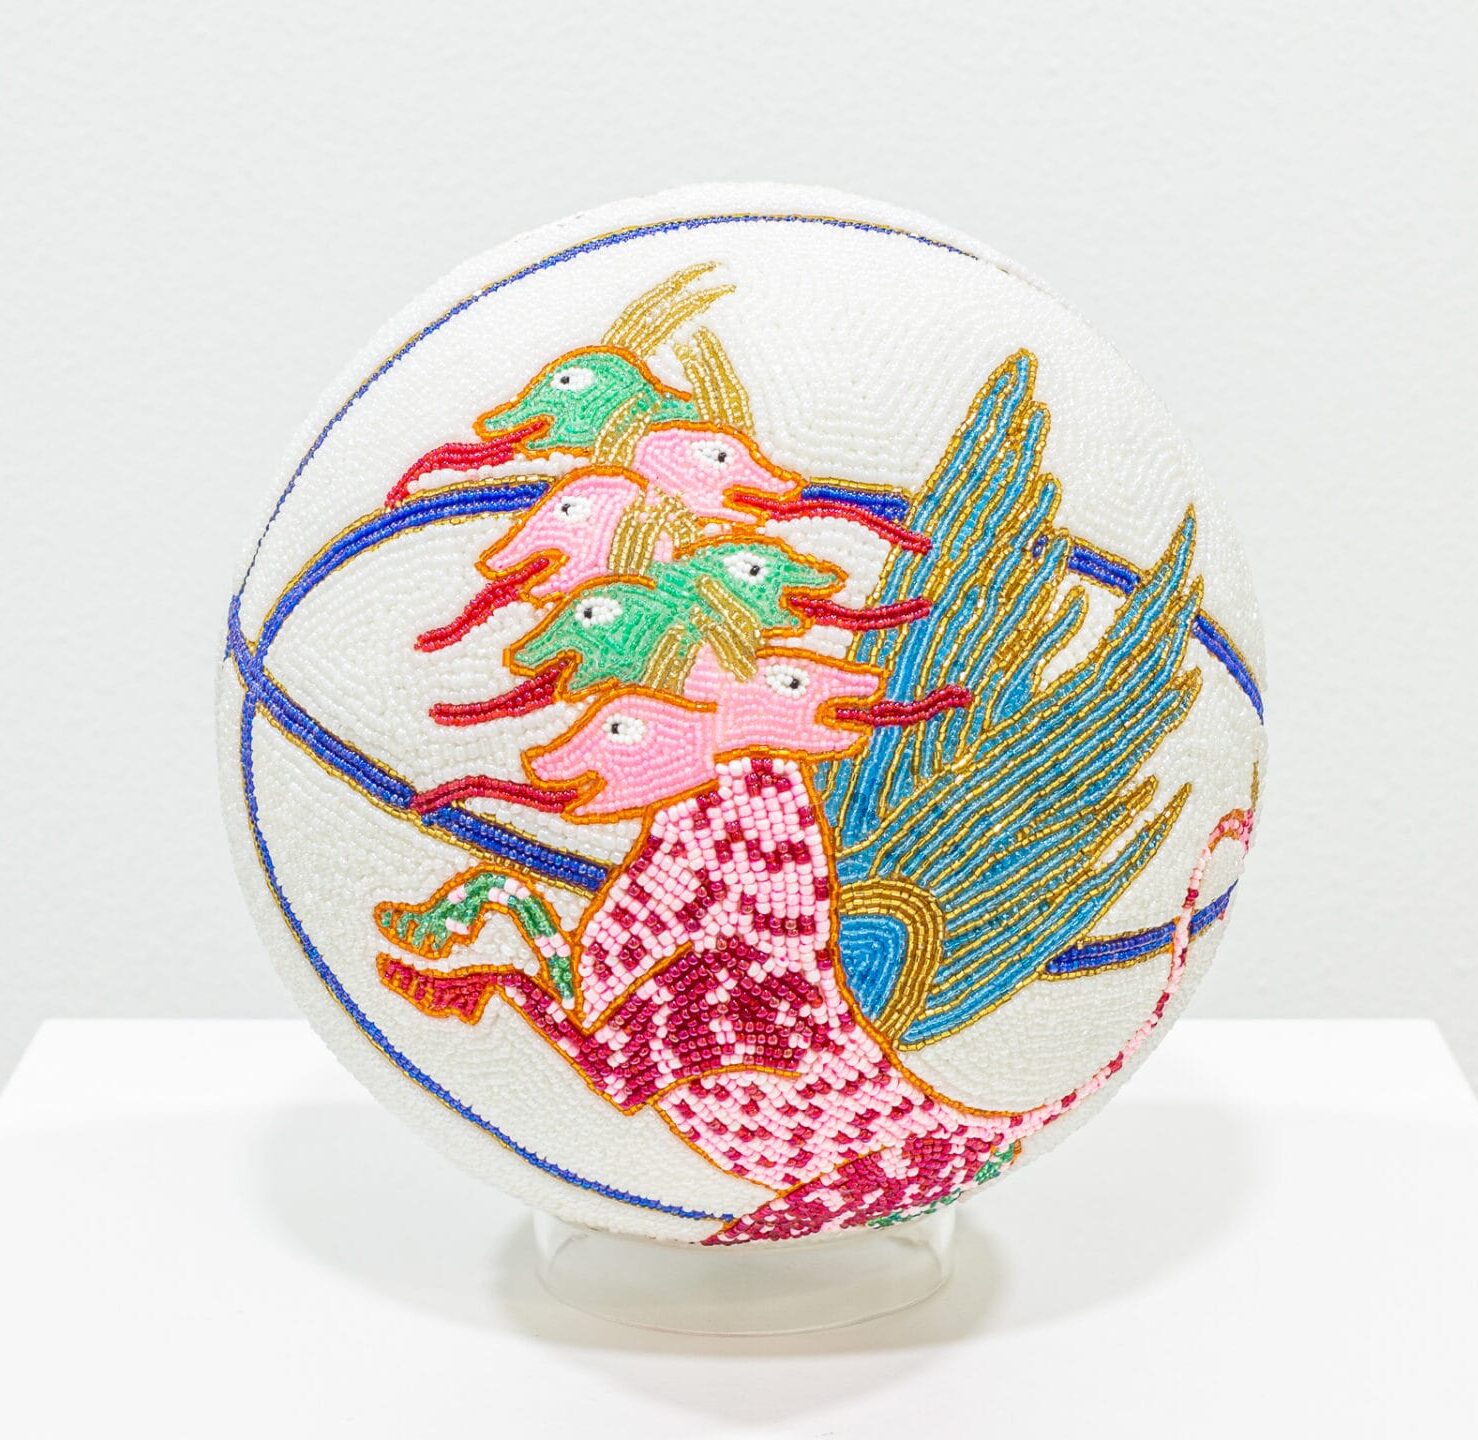 In His World-Building Series ‘New Prophets,’ Jorge Mañes Rubio Cloaks Basketballs in Beads